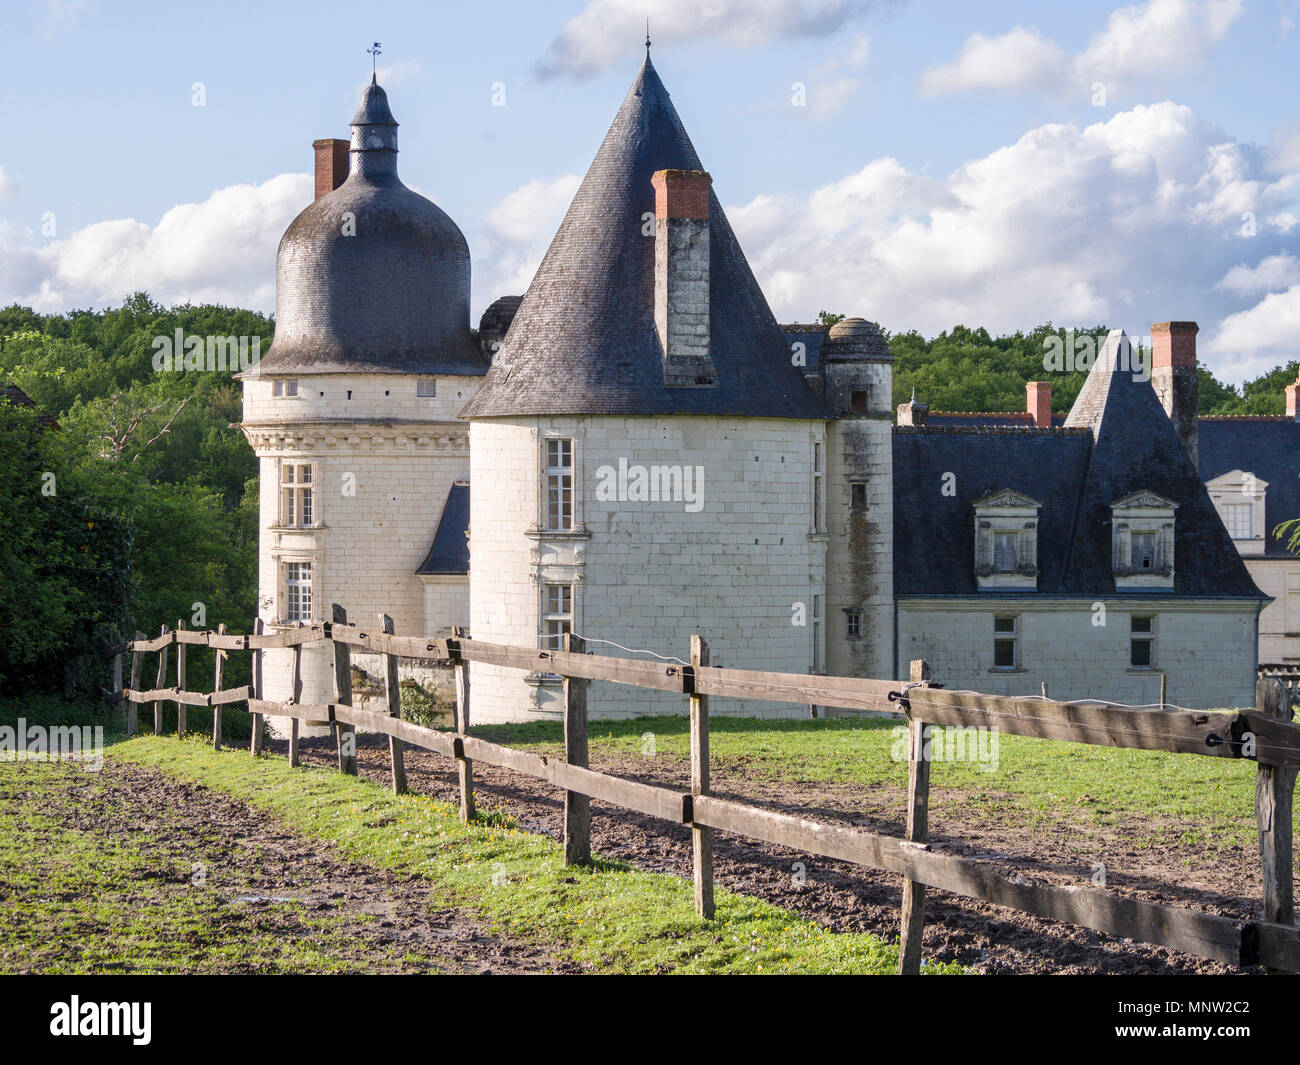 Two towers of Chateau du Gue-Pean: This well kept Chateau in the Loire region of France is surrounded by a thriving horse farm. Stock Photo